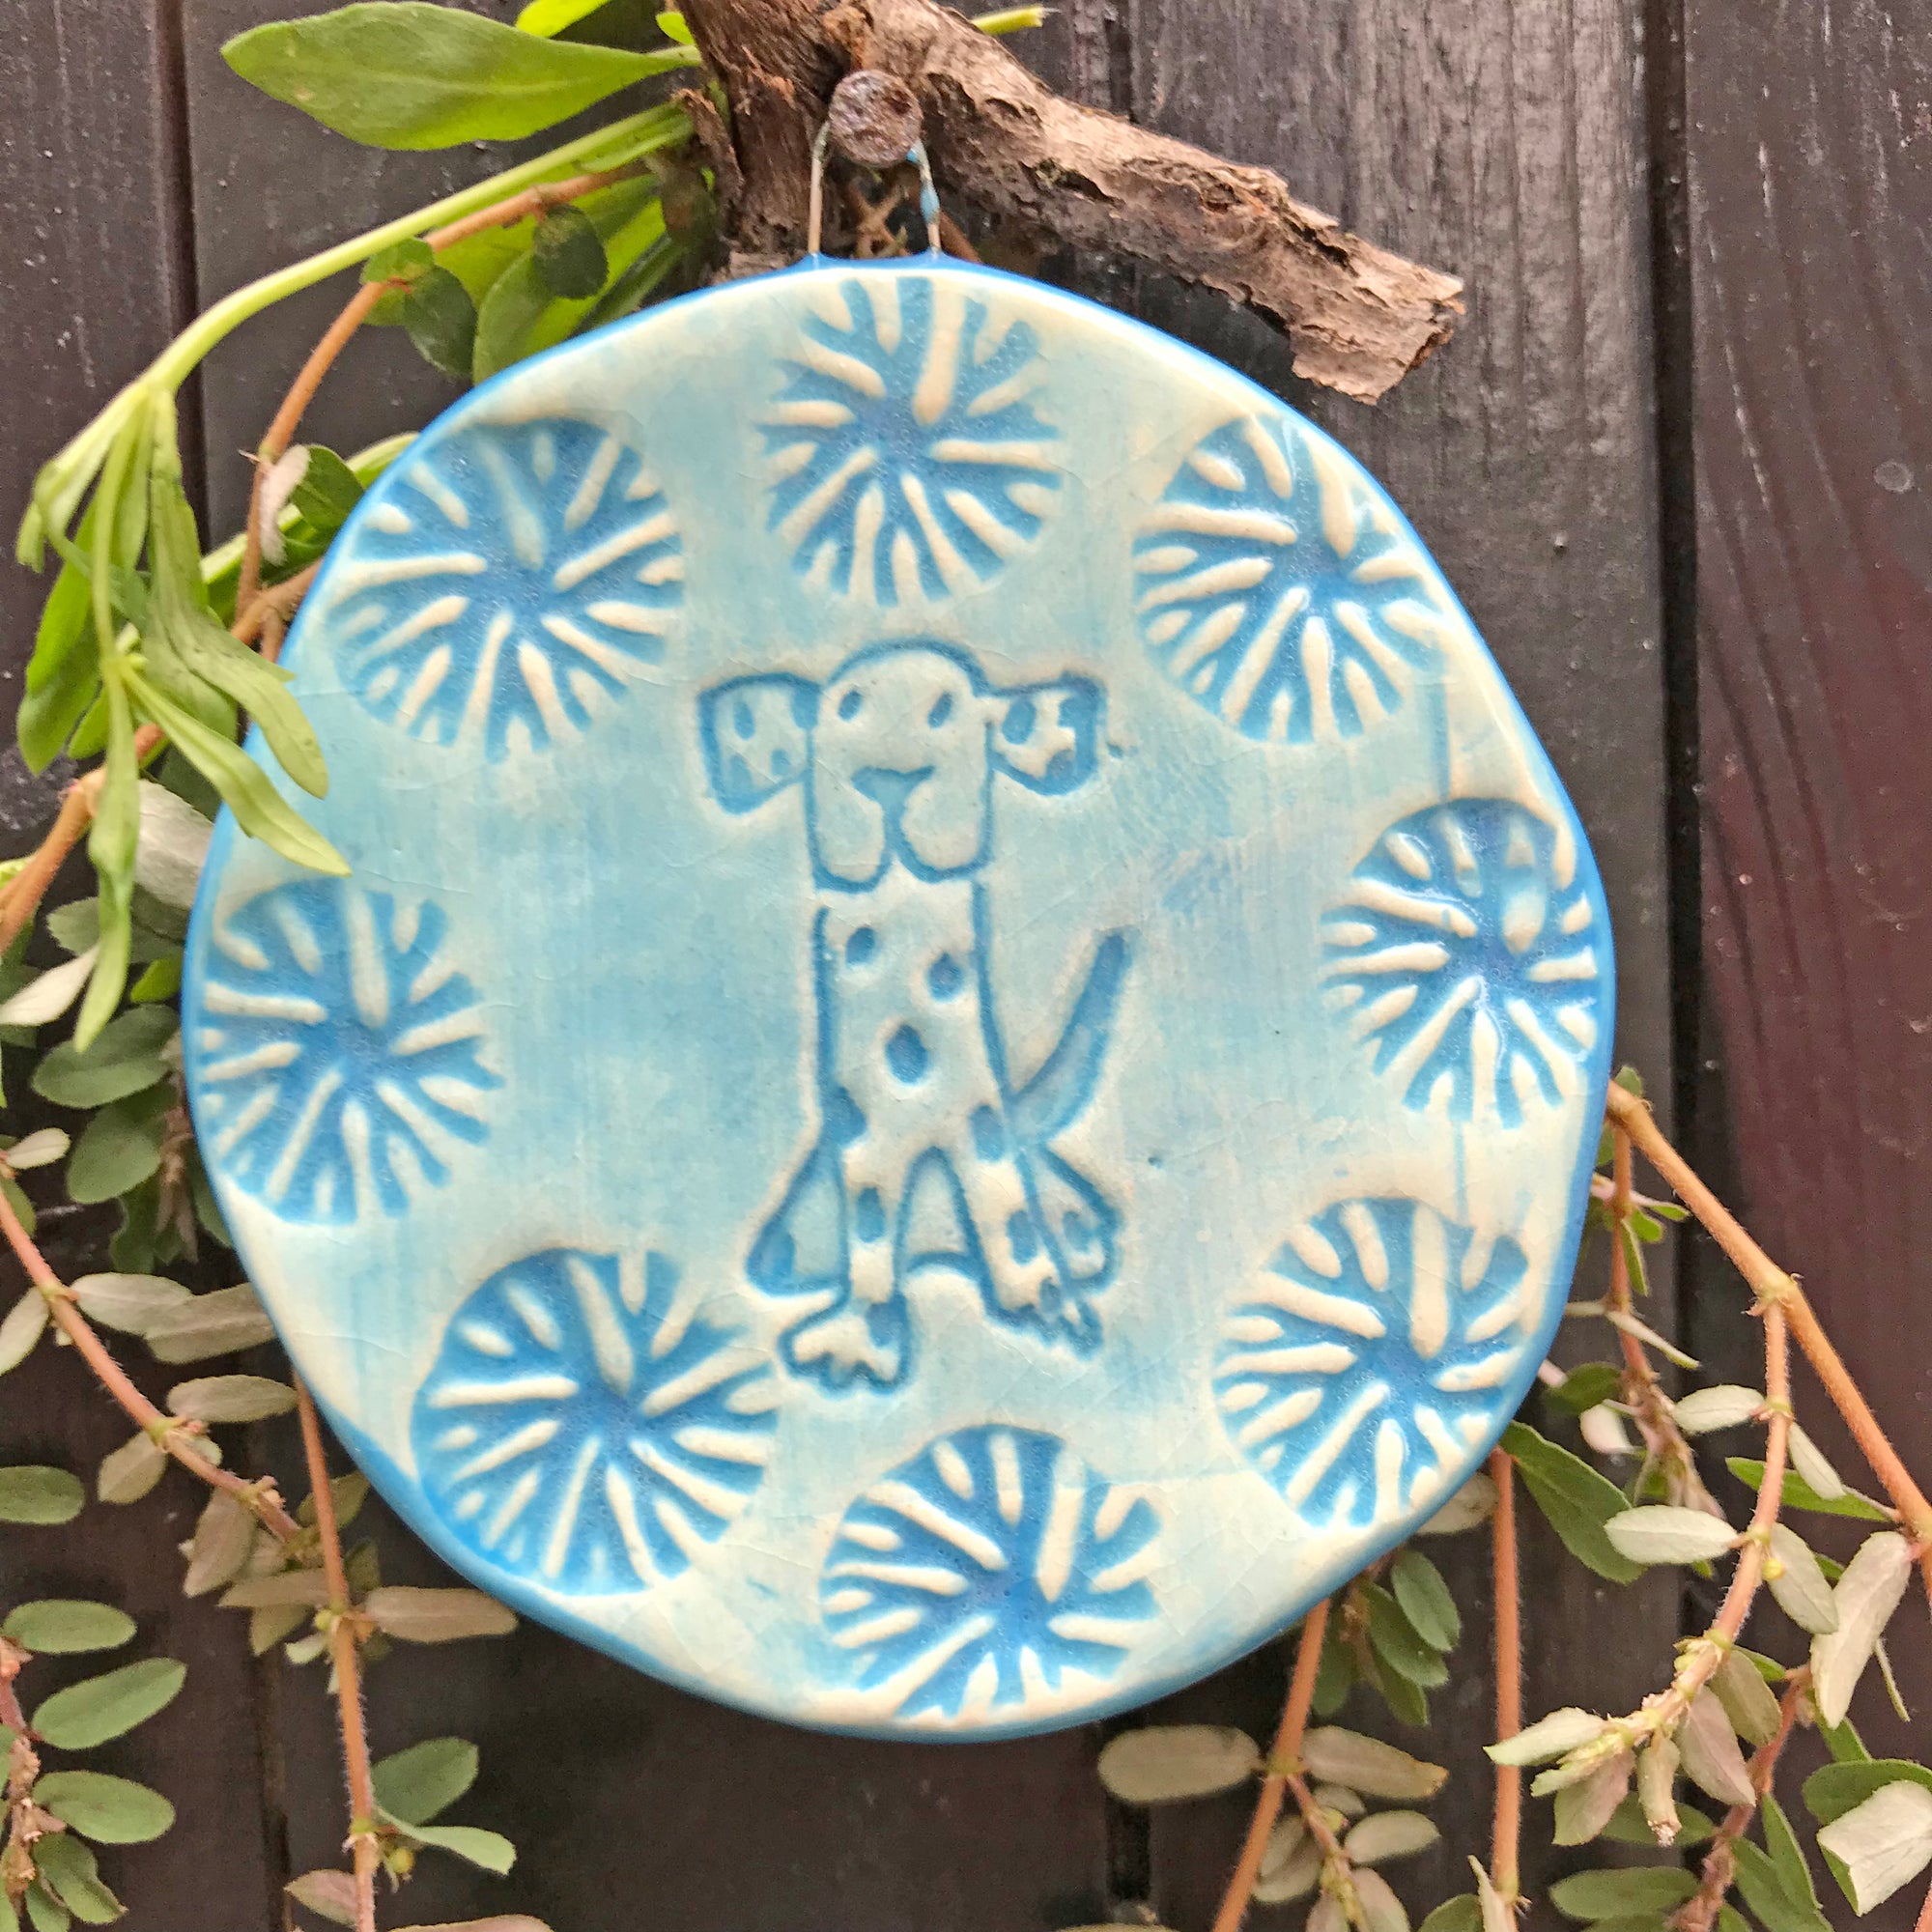 Dog Ornament glazed in marine blue glaze, a happy color often used for boat sails.  